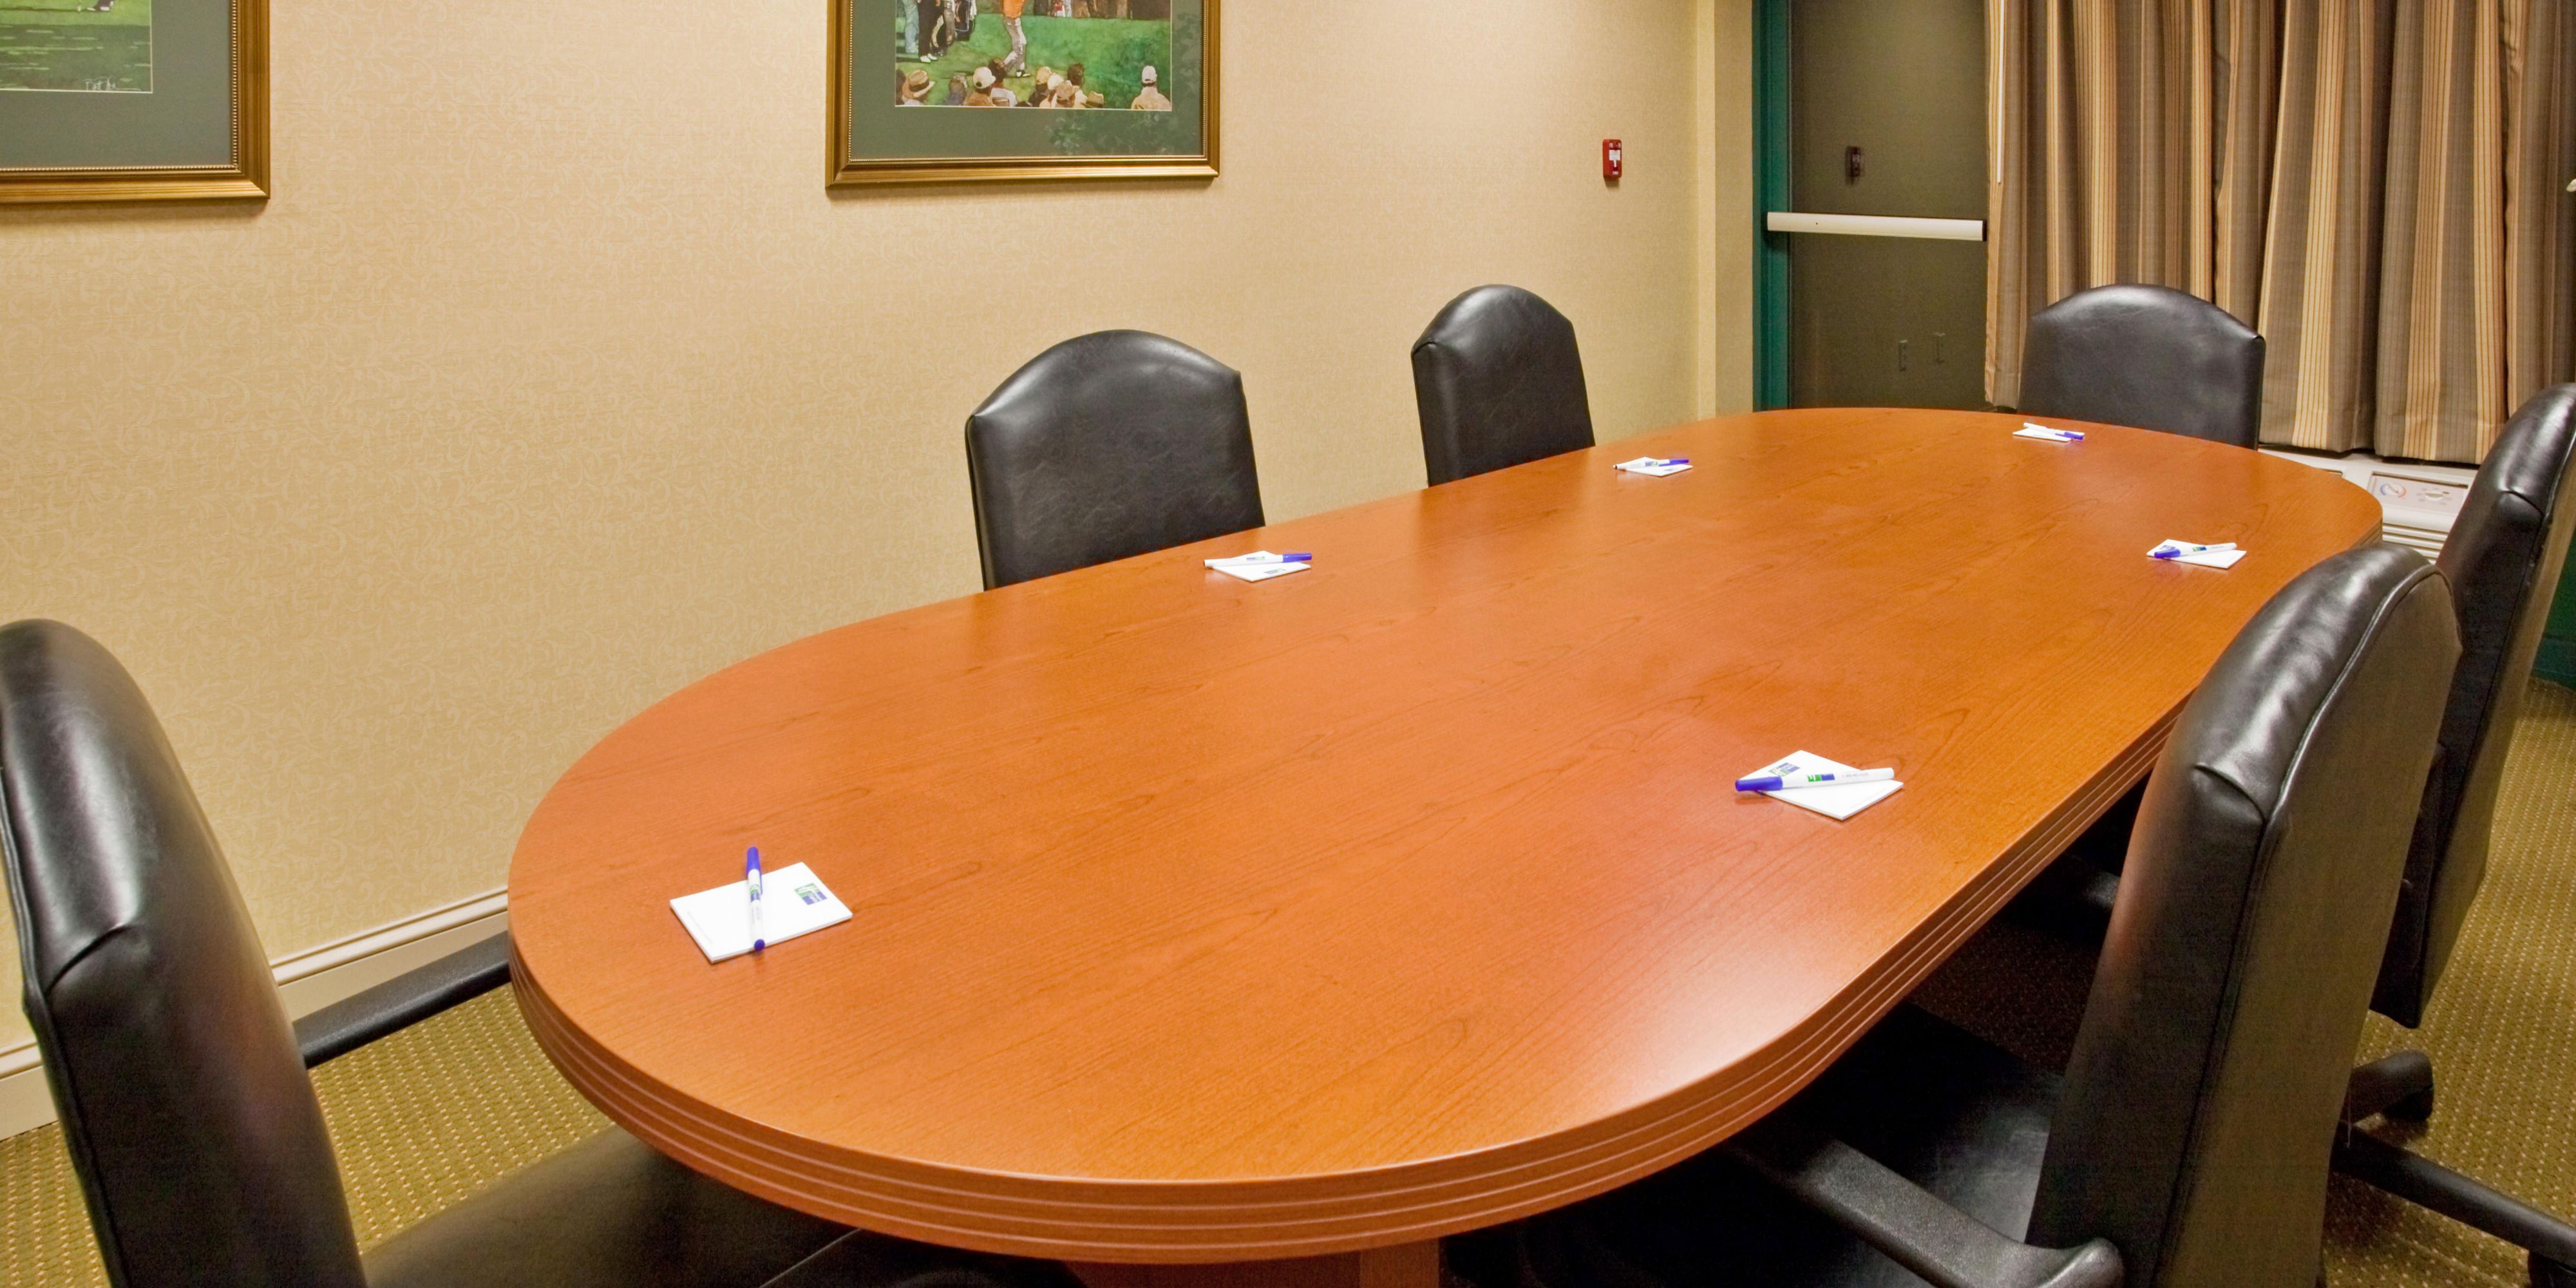 Our hotel features a board room for your intimate meeting needs. Please contact the hotel directly for details and to book.